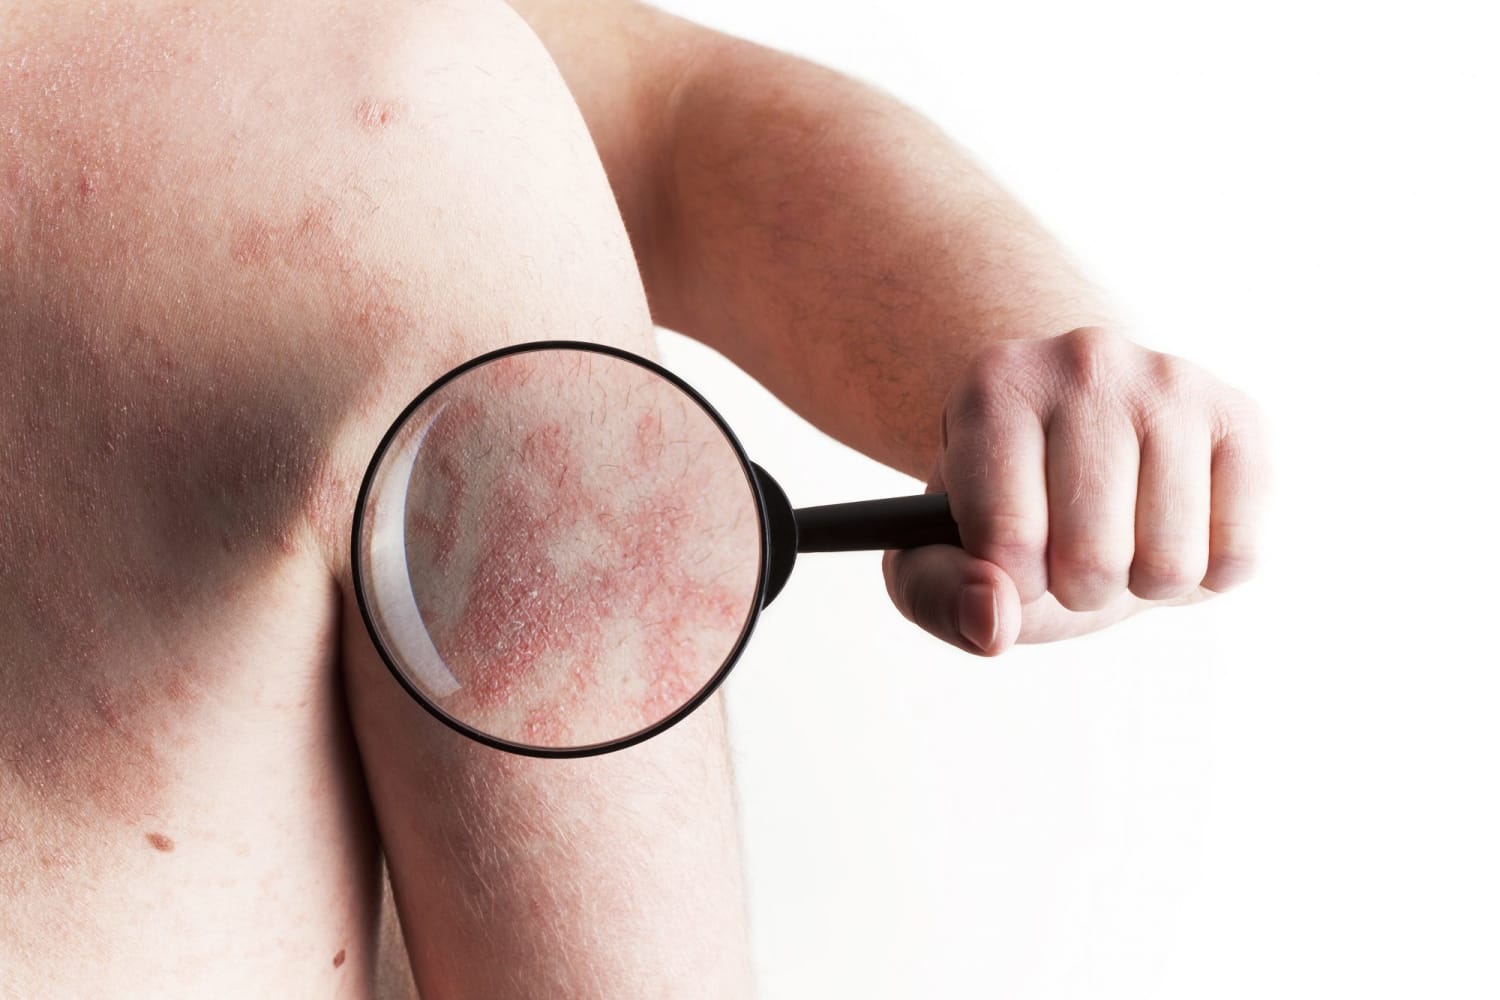 6 Things That Can Make Psoriasis Better